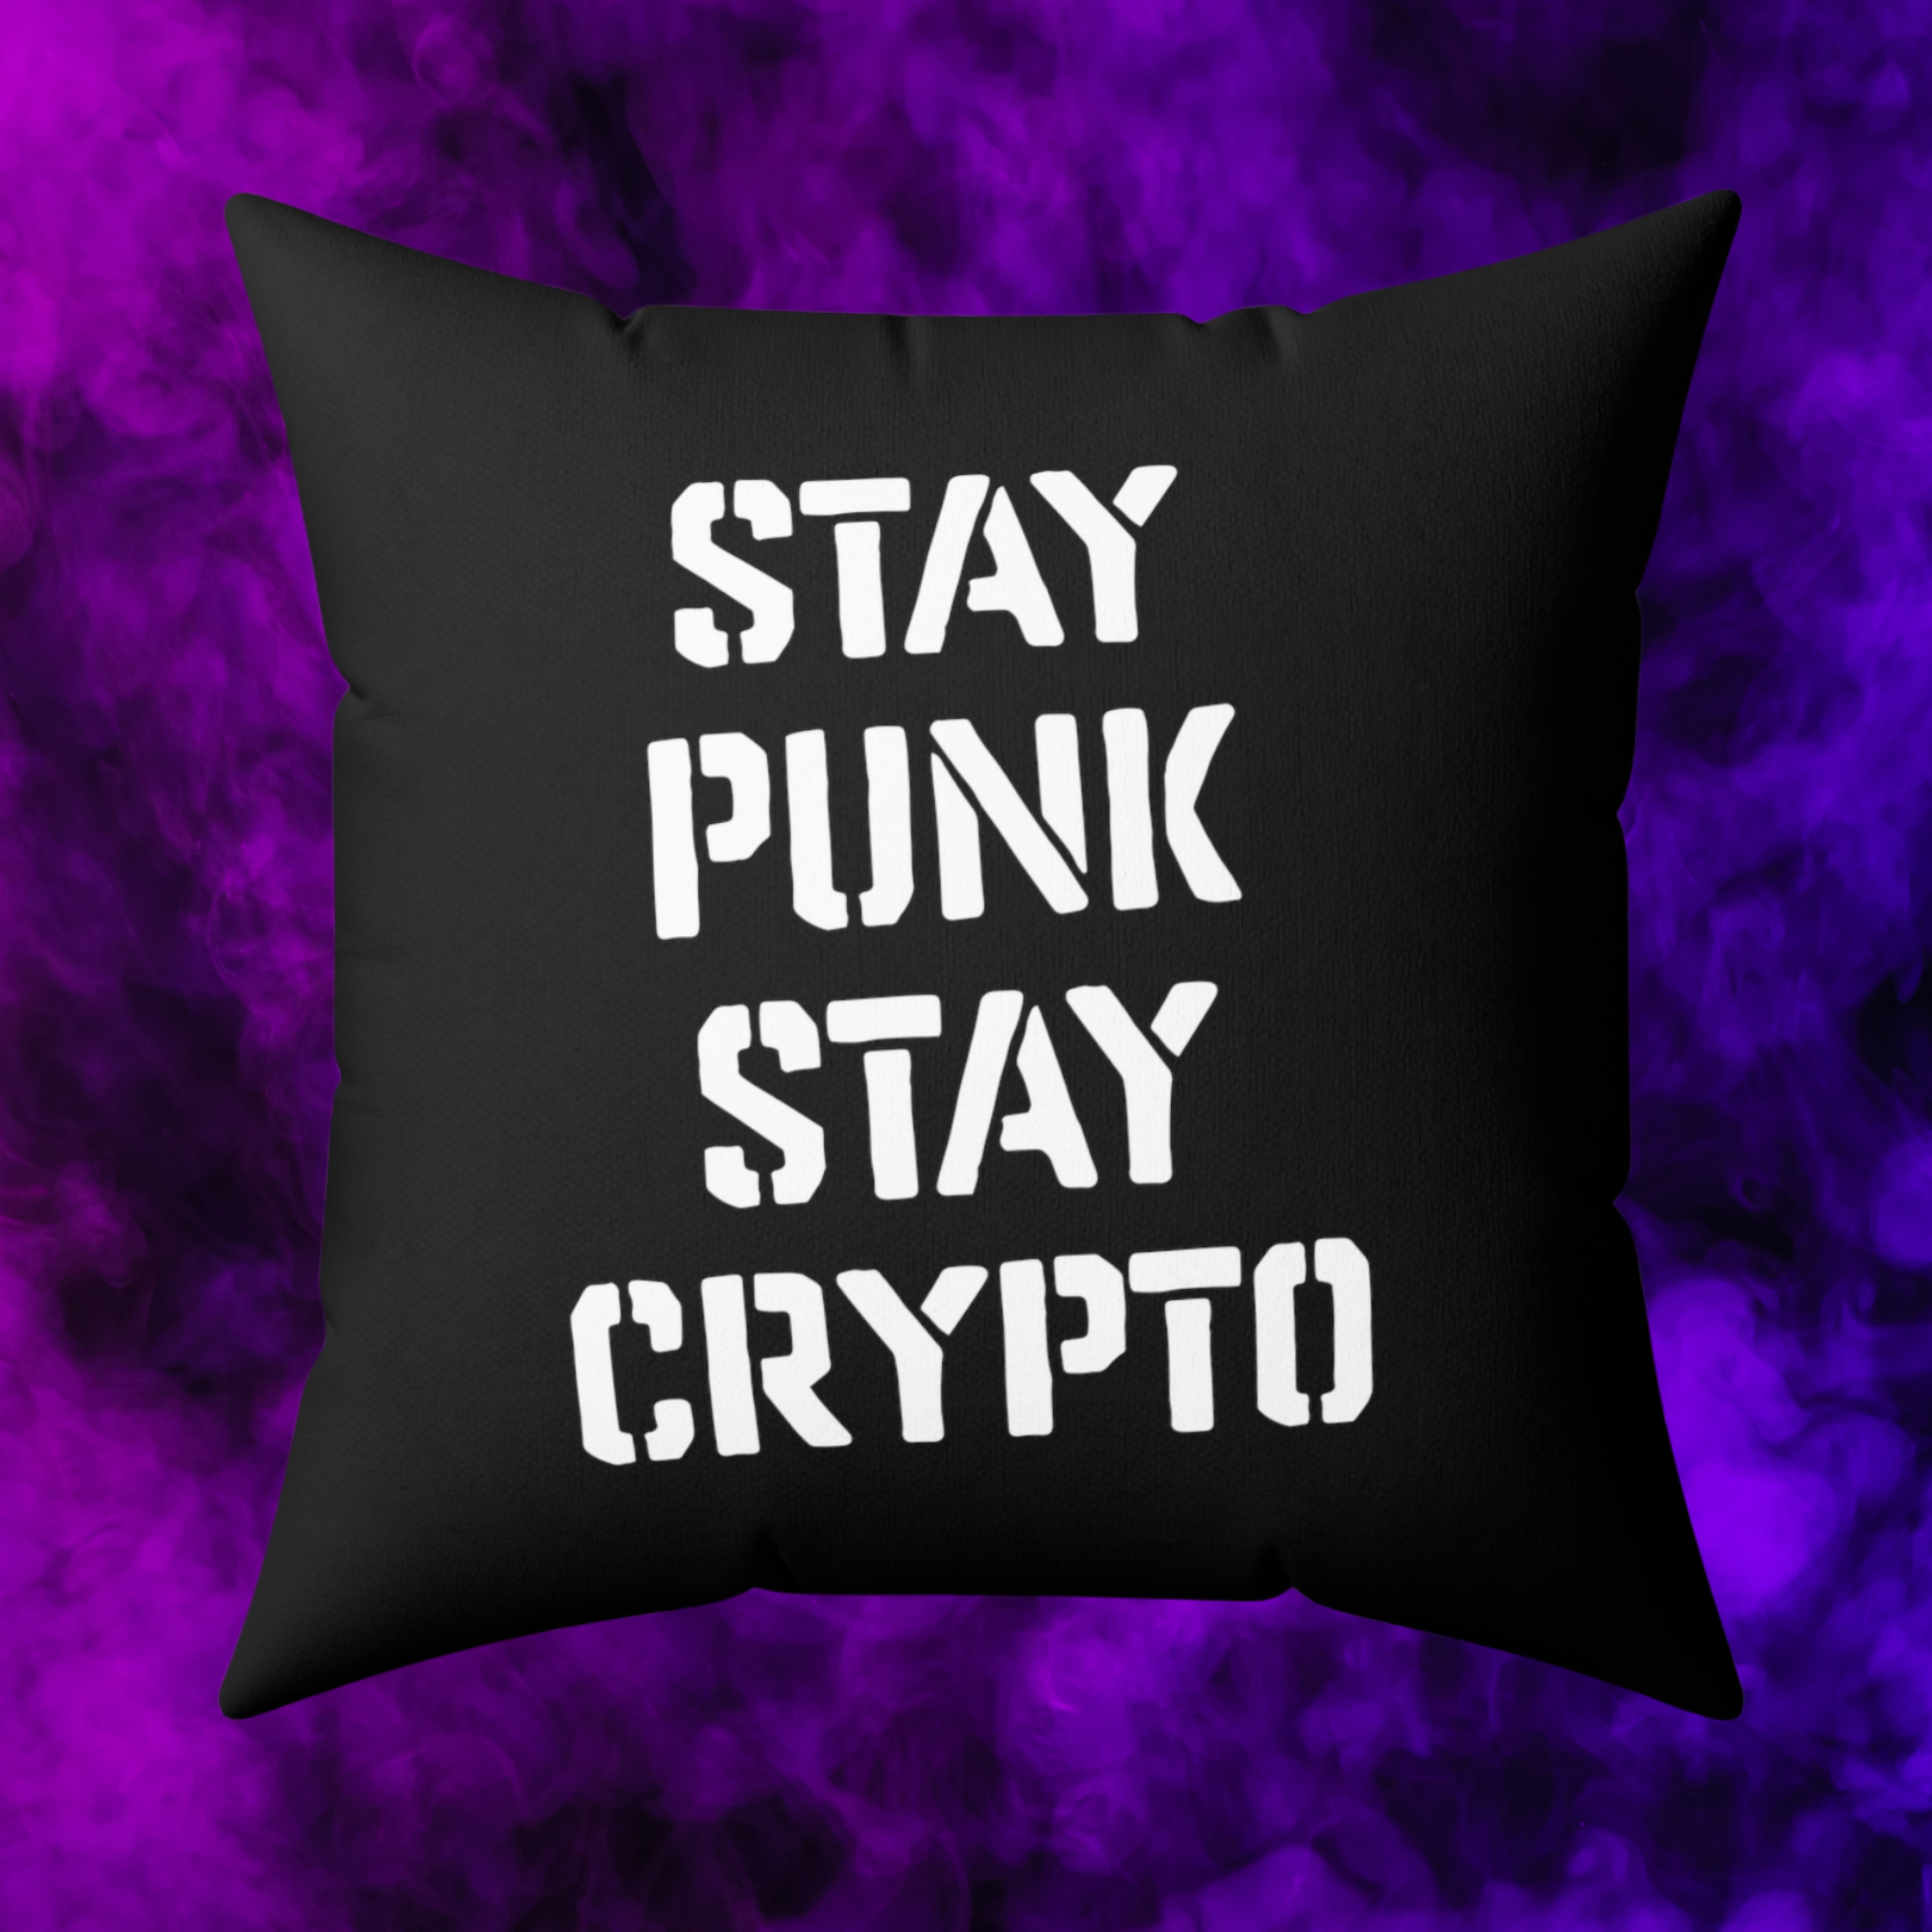 Bitcoin Cyfurpunk Pillow back view features the slogan Stay Punk Stay Crypto. Available from NEONCRYPTO STORE.